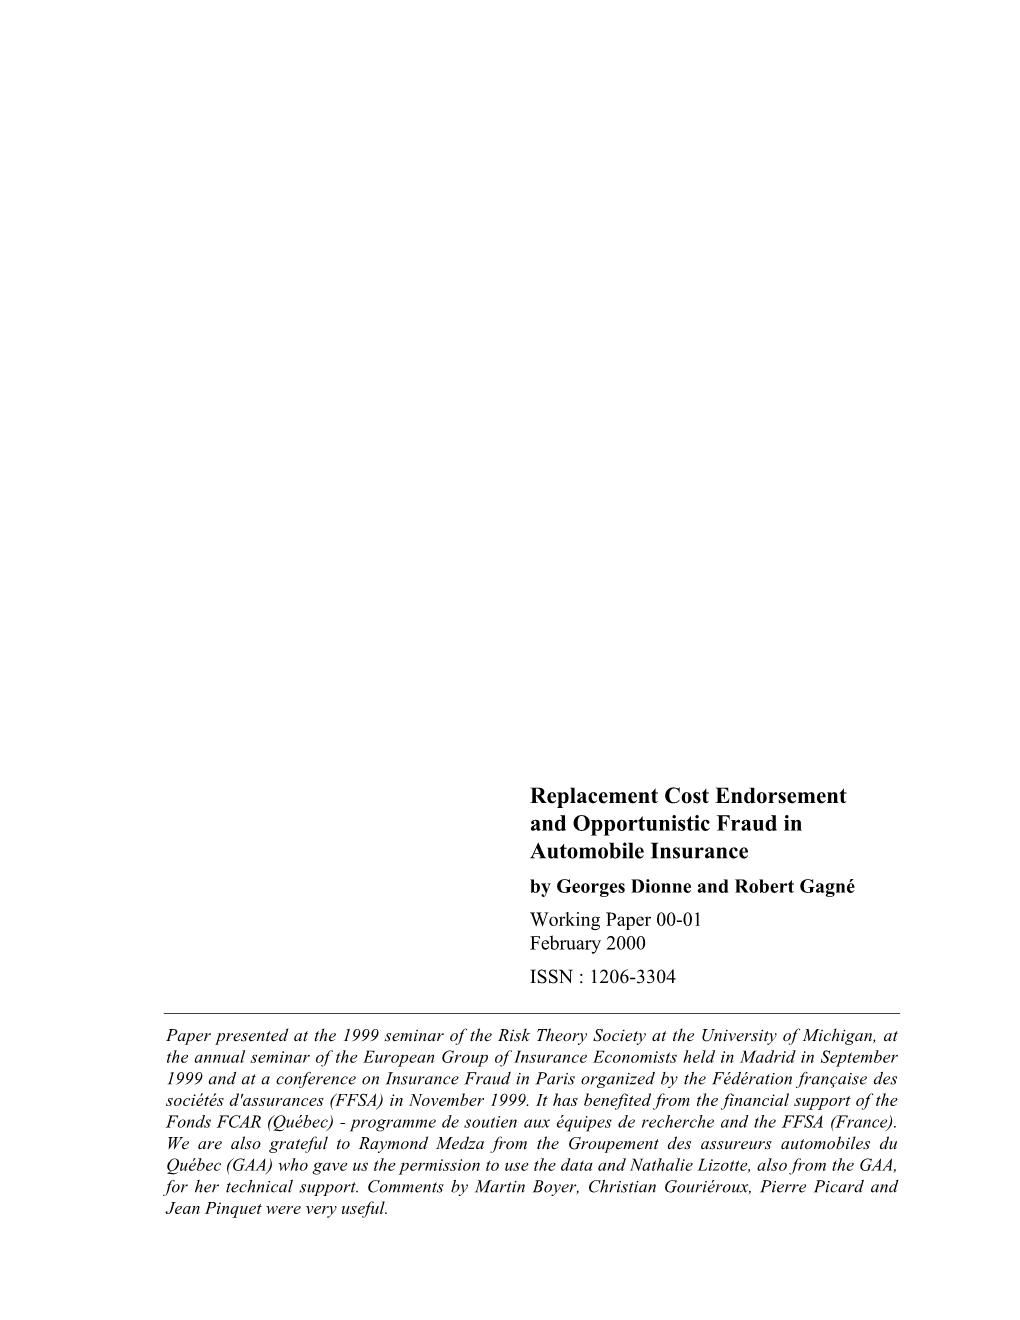 Replacement Cost Endorsement and Opportunistic Fraud in Automobile Insurance by Georges Dionne and Robert Gagné Working Paper 00-01 February 2000 ISSN : 1206-3304